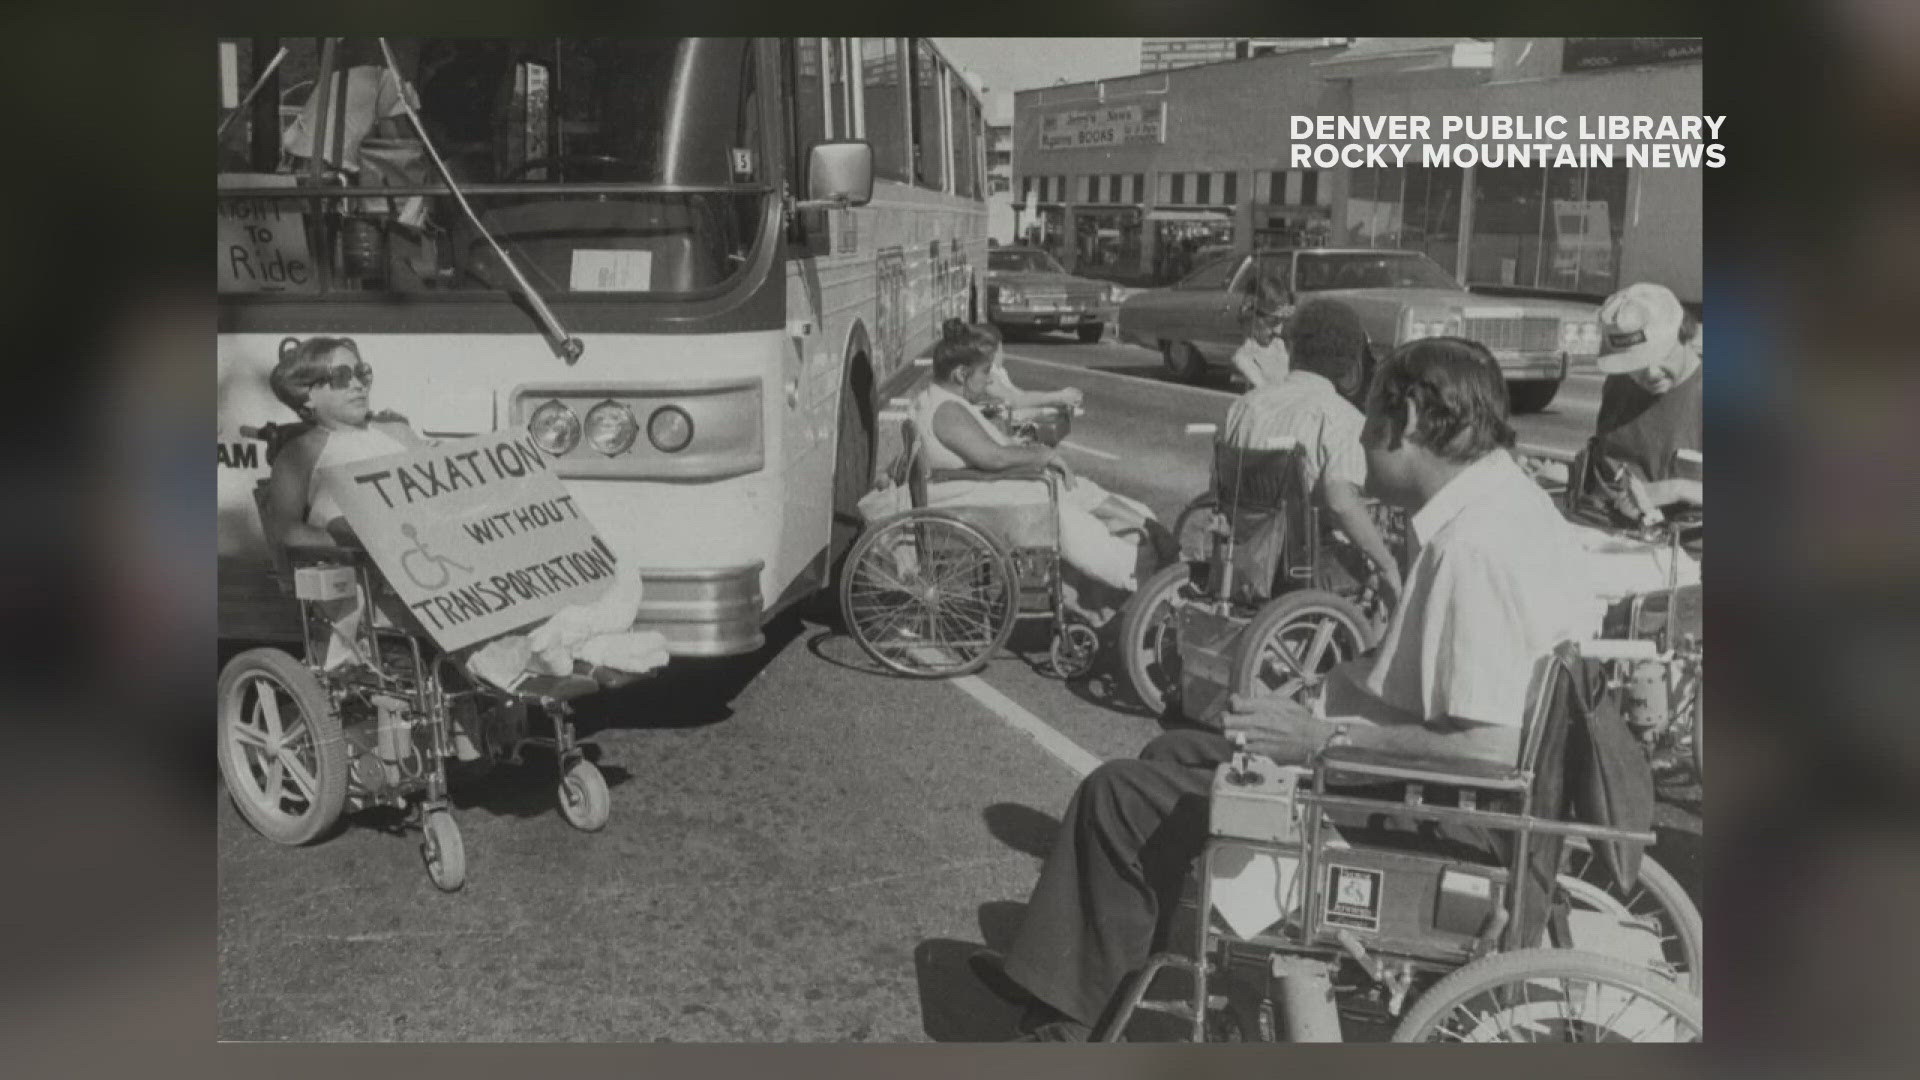 On July 5, 1978, protesters blocked Colfax and Broadaway to demand better accommodations for people with disabilities.